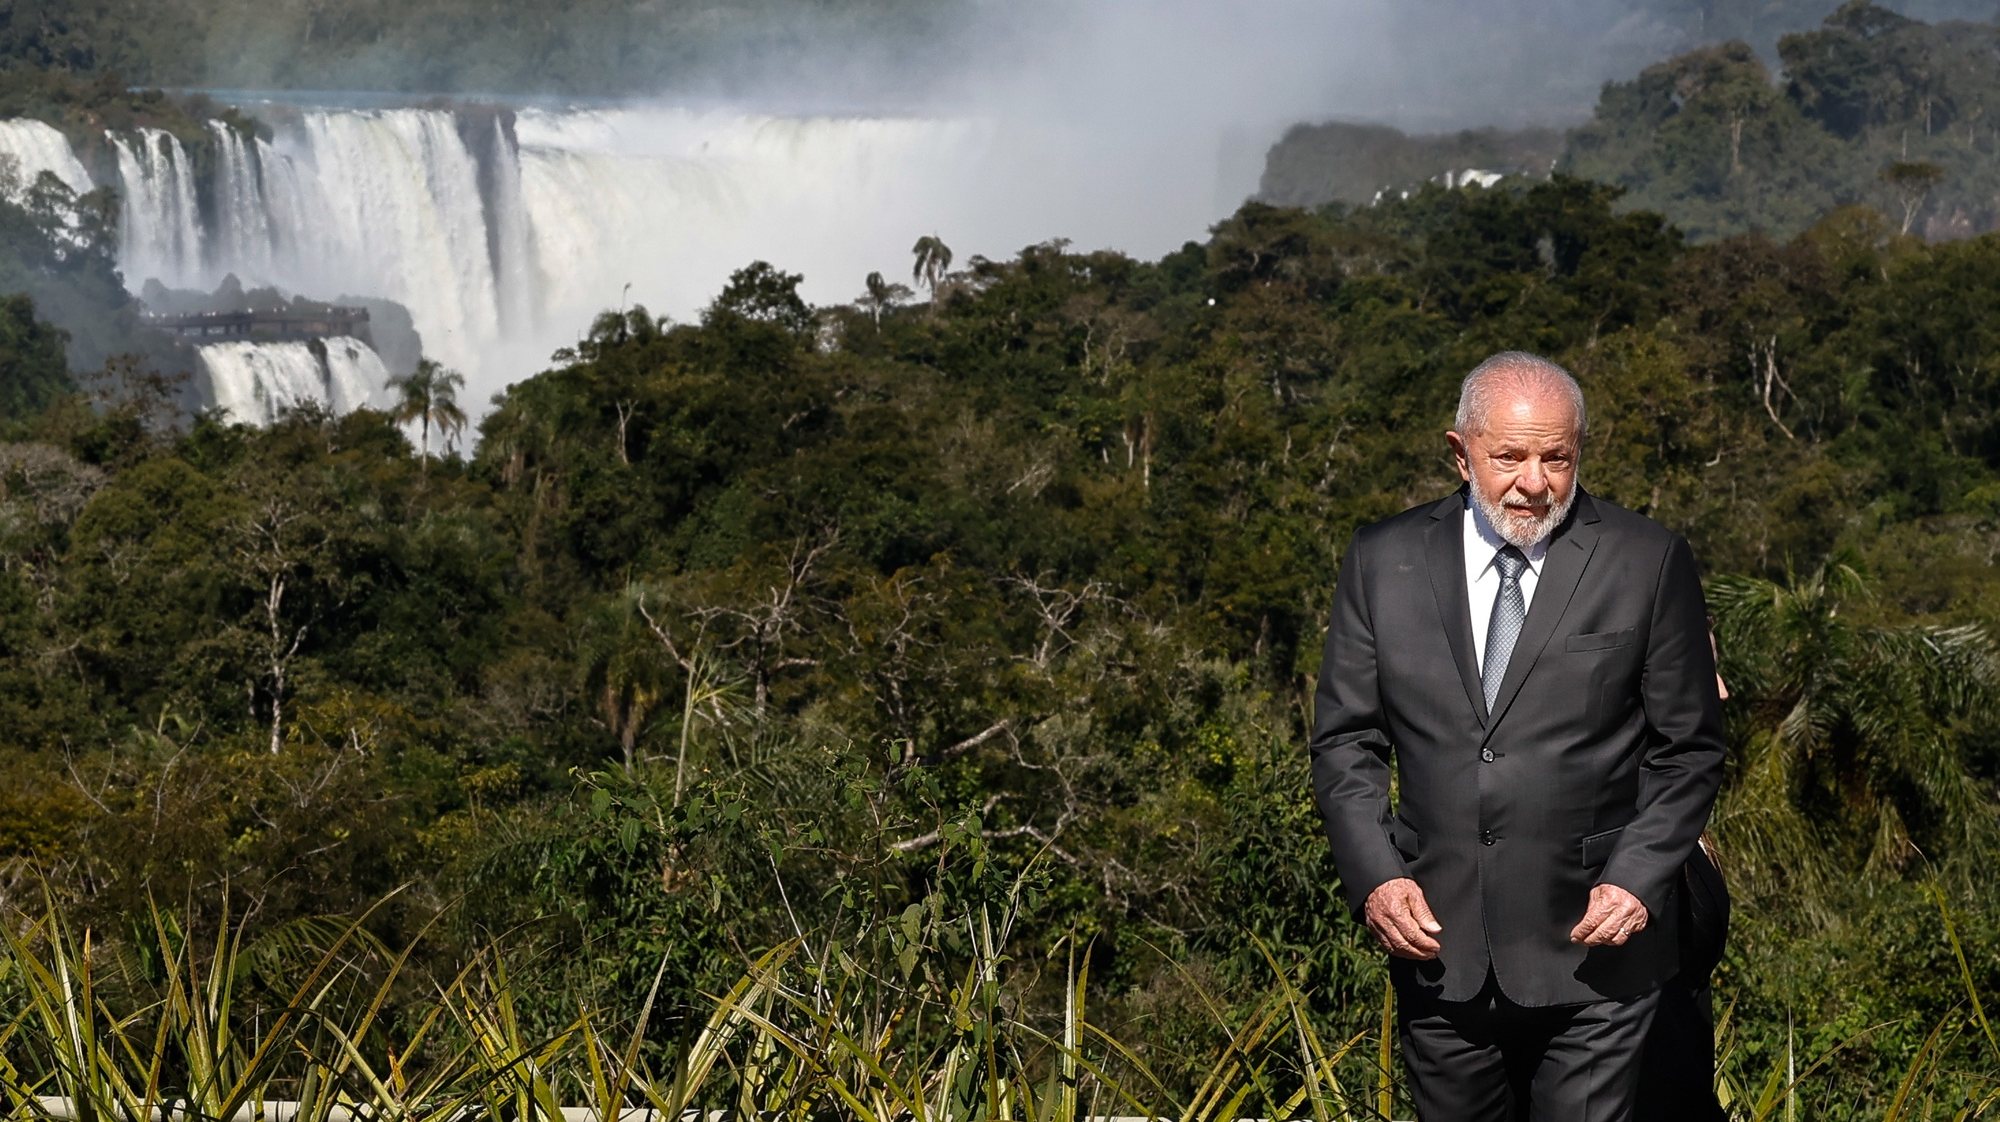 epa10726530 Brazilian President Luiz Inacio Lula da Silva stands with the waterfalls seen in the background during the Mercosur summit, in Puerto Iguazu, Argentina, 04 July 2023. Lula da Silva received the pro tempore presidency of Mercosur on 04 July from his Argentine counterpart Alberto Fernandez, who says goodbye to the bloc&#039;s summits, since he is not running for re-election. Fernandez handed over the Mercosur baton, which is also made up of Paraguay and Uruguay, to the progressive leader and closed the LXII Summit of Heads of State of the South American group, which was held in a luxurious hotel in Puerto Iguazu.  EPA/JUAN IGNACIO RONCORONI